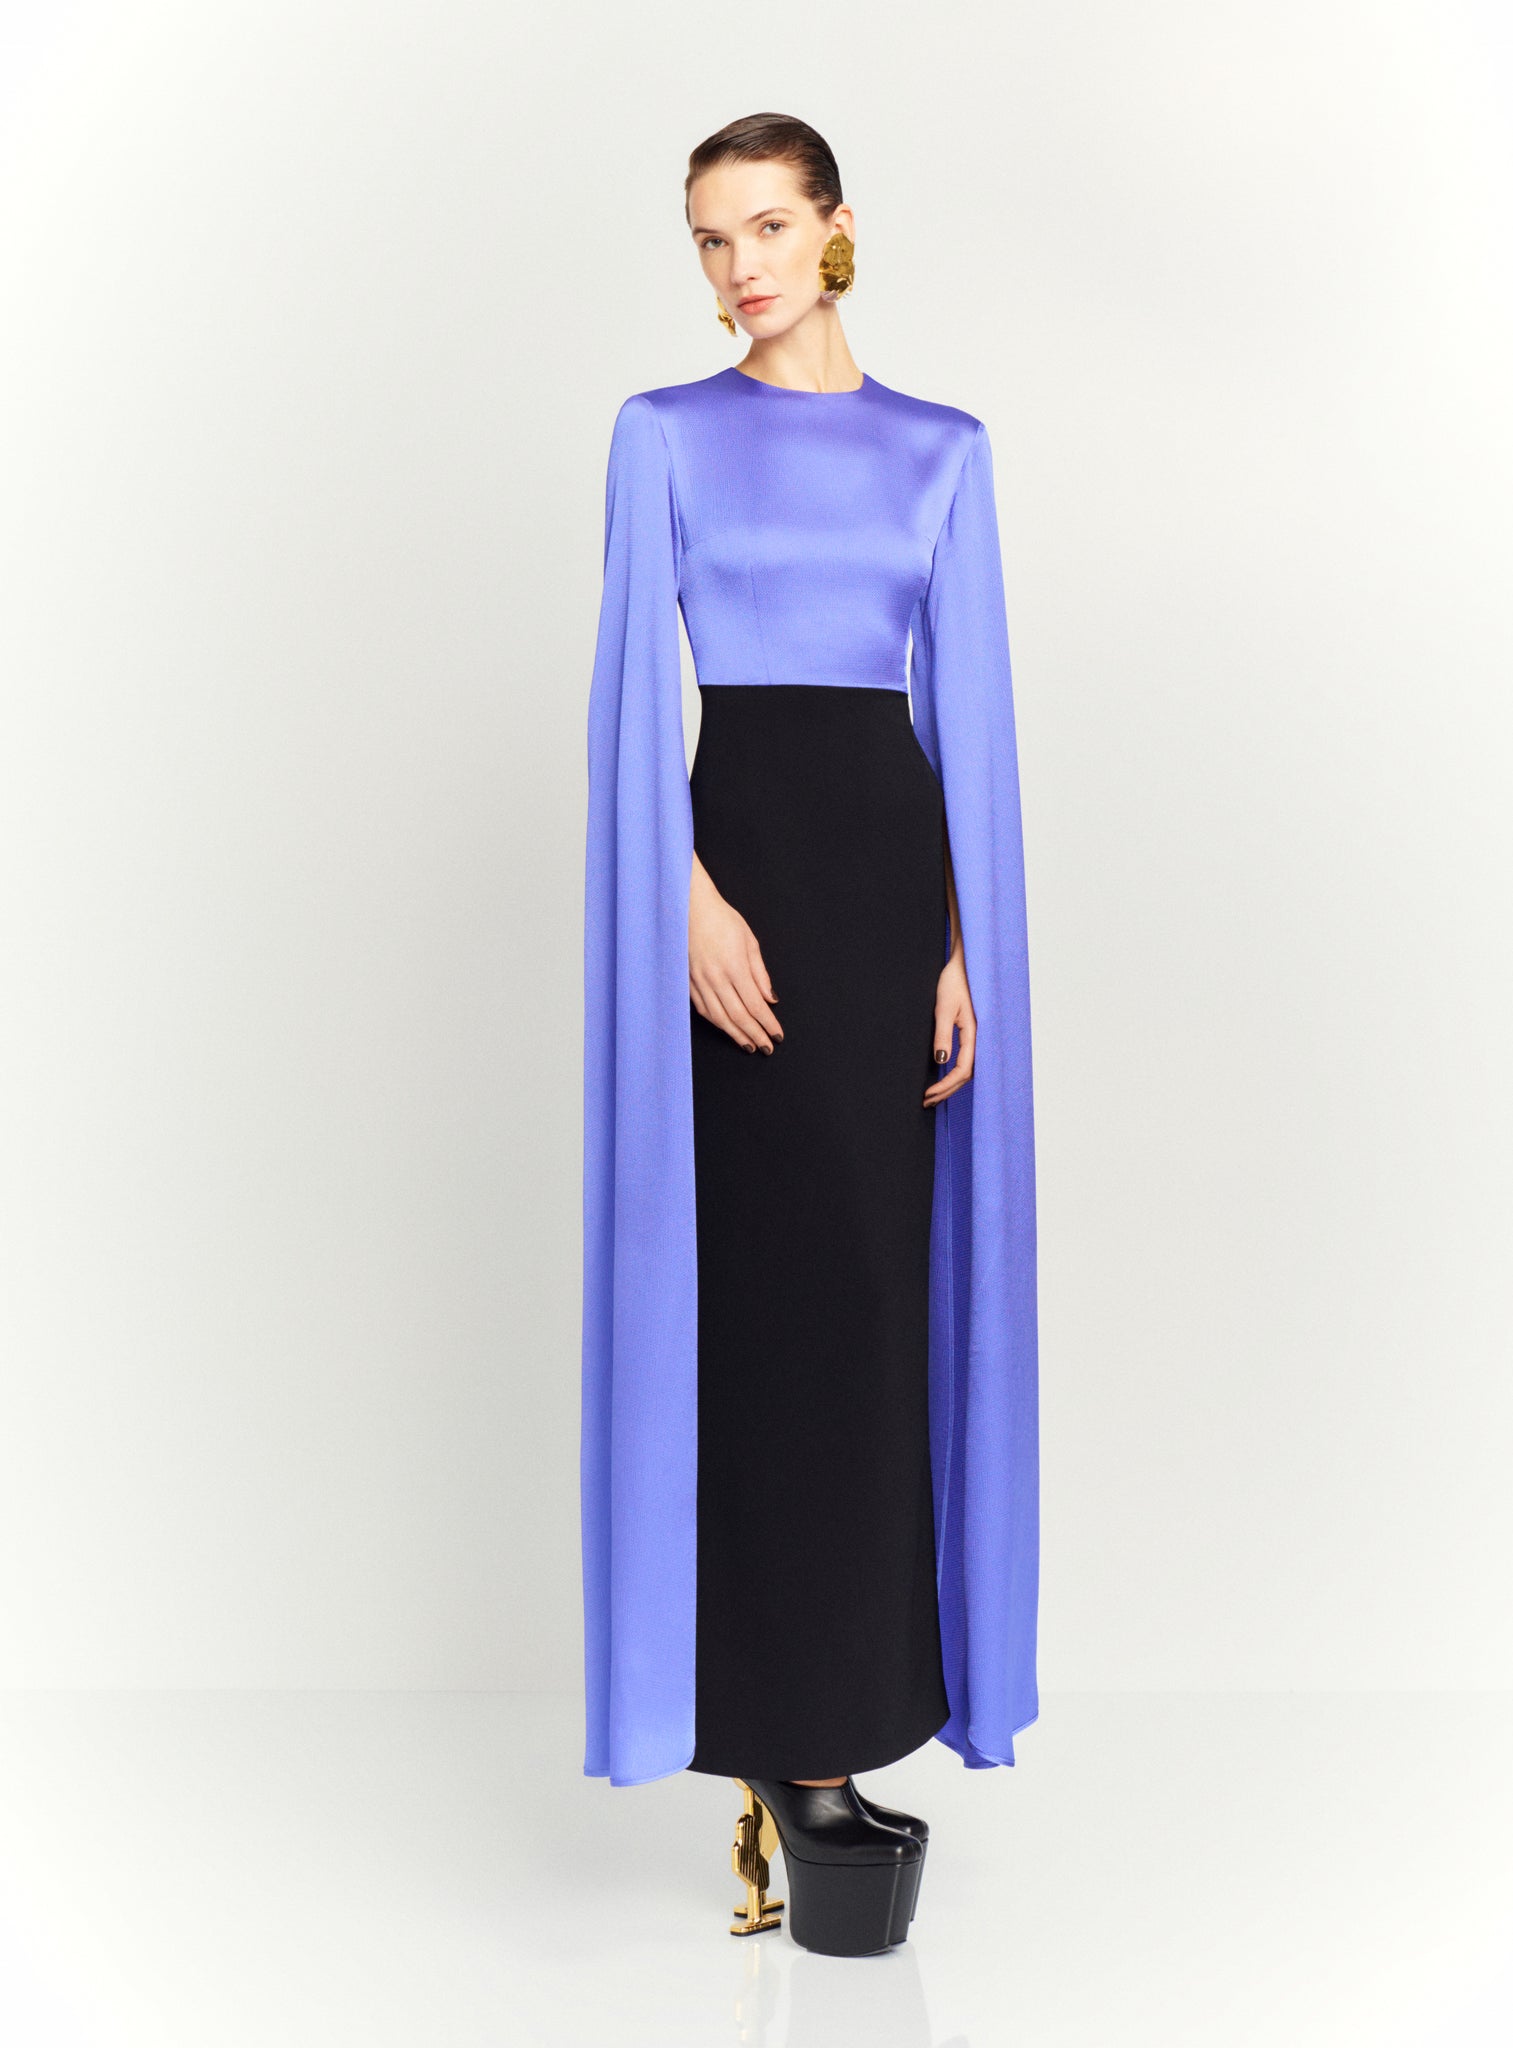 The Adley Maxi Dress in Periwinkle and Black